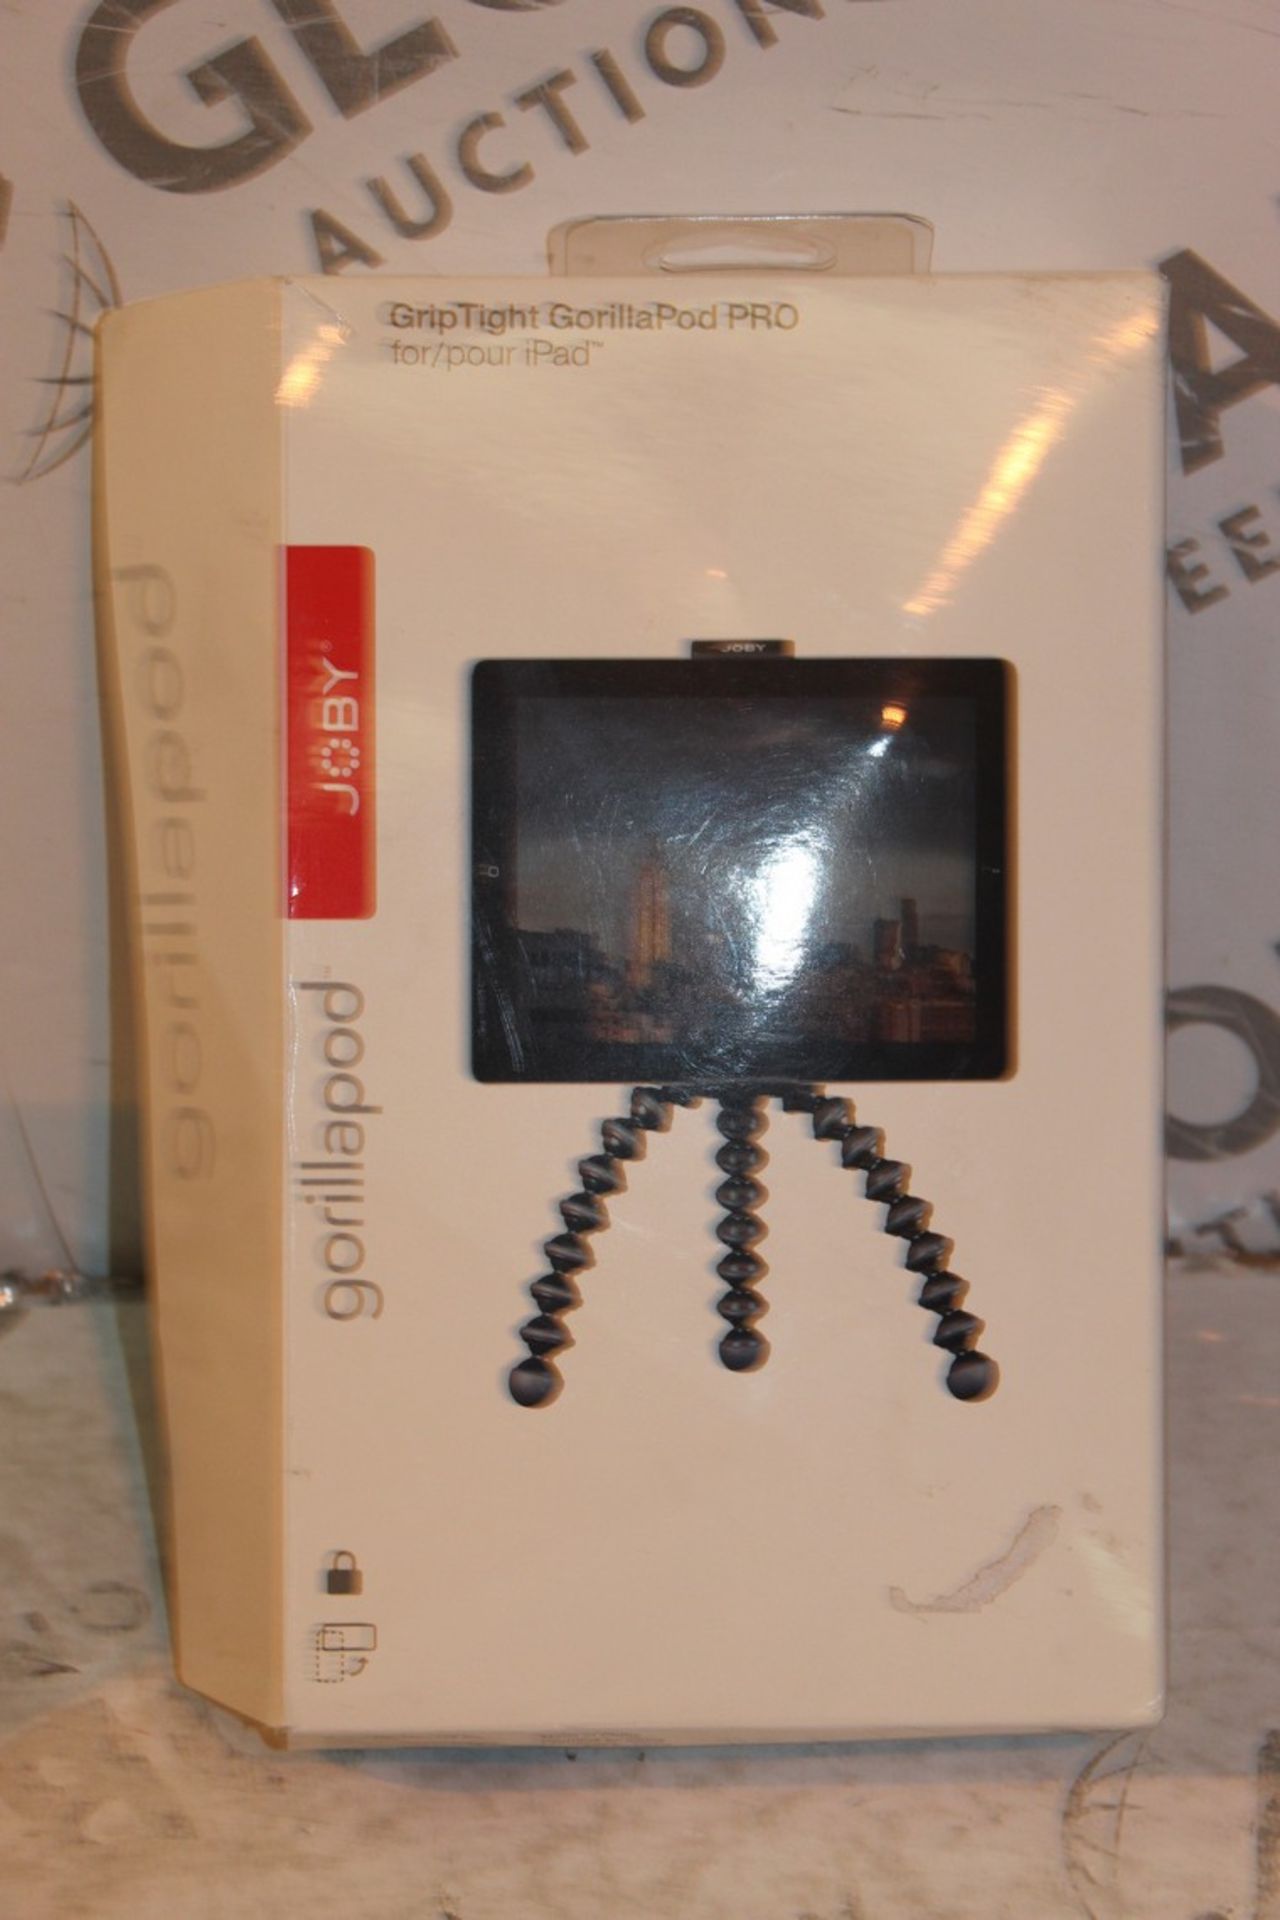 Boxed Joby Gorrilla Pod Grip Tight Pro Ipad Stand RRP £70 (Appraisals Available Upon Request)